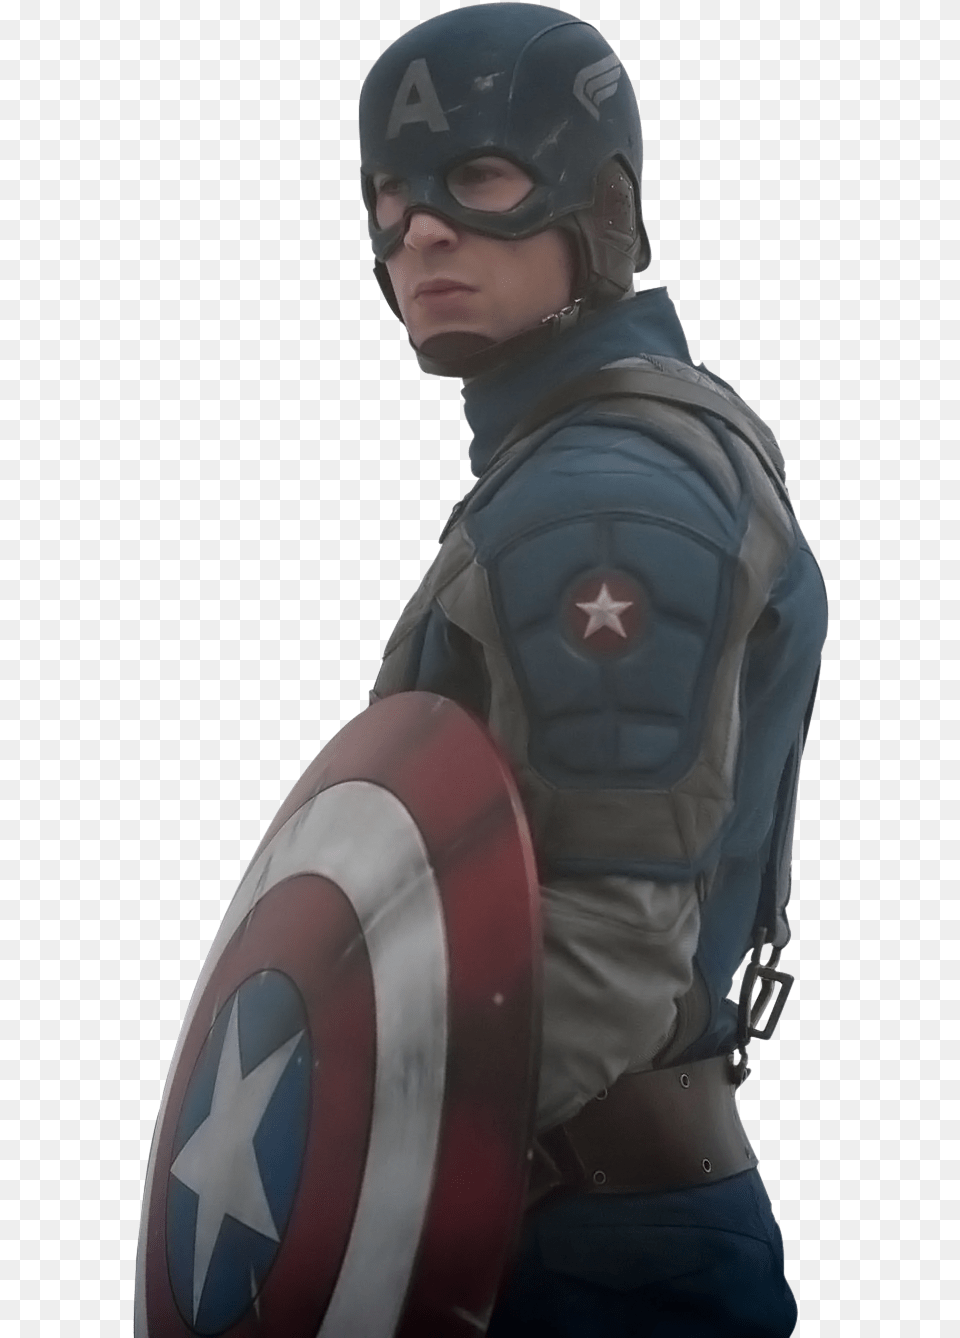 Capito Amrica Captain America The First Avenger Stills, Armor, Adult, Male, Man Free Png